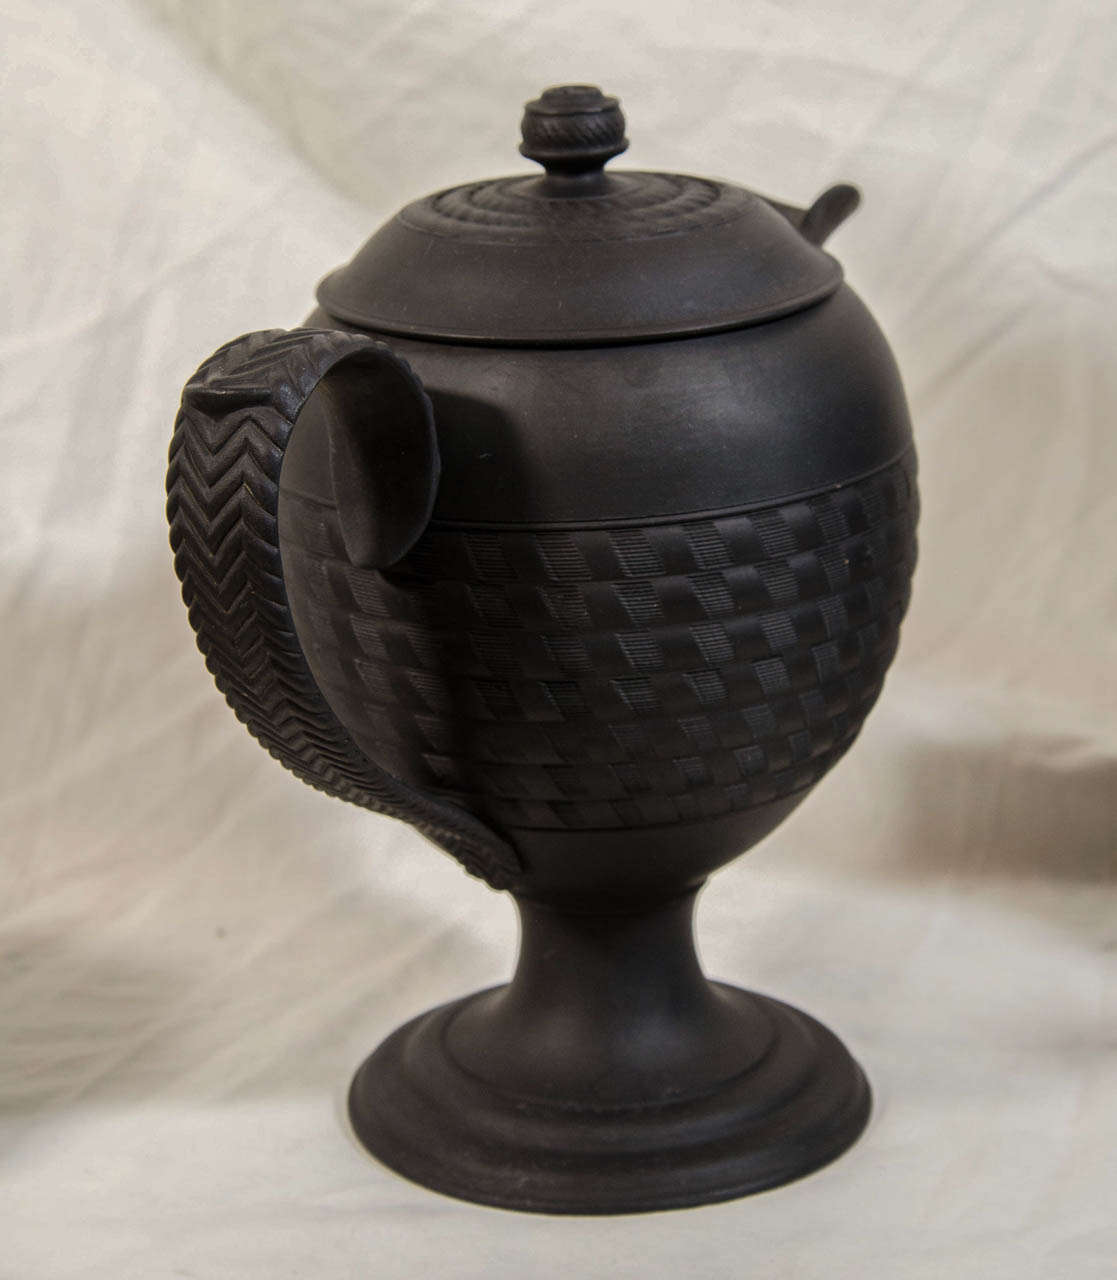 19th Century A Collection of Black Basalt Tea and Coffee Pots